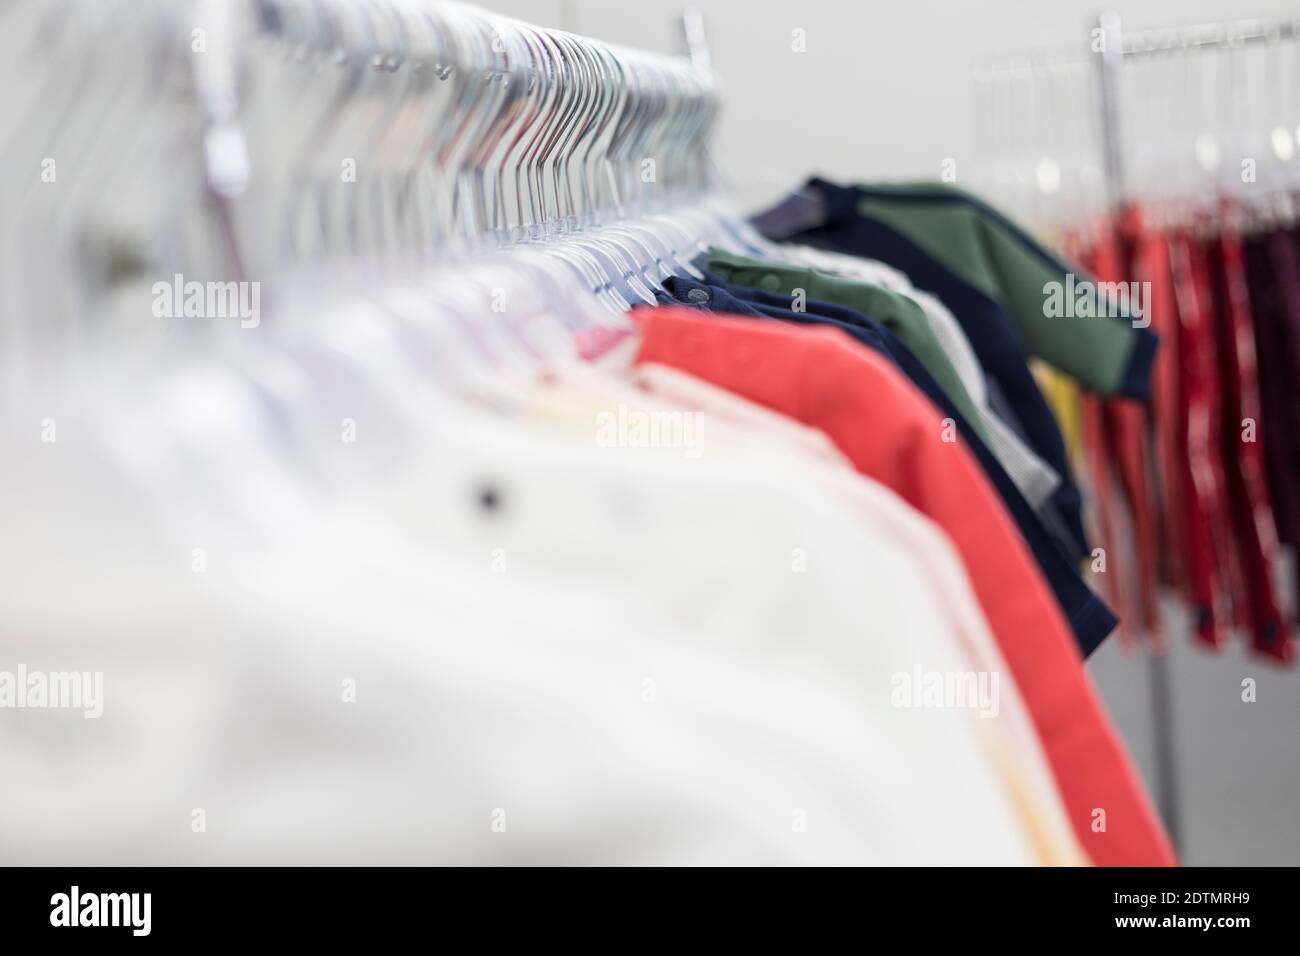 Baby articles, clothes in a shop Stock Photo - Alamy